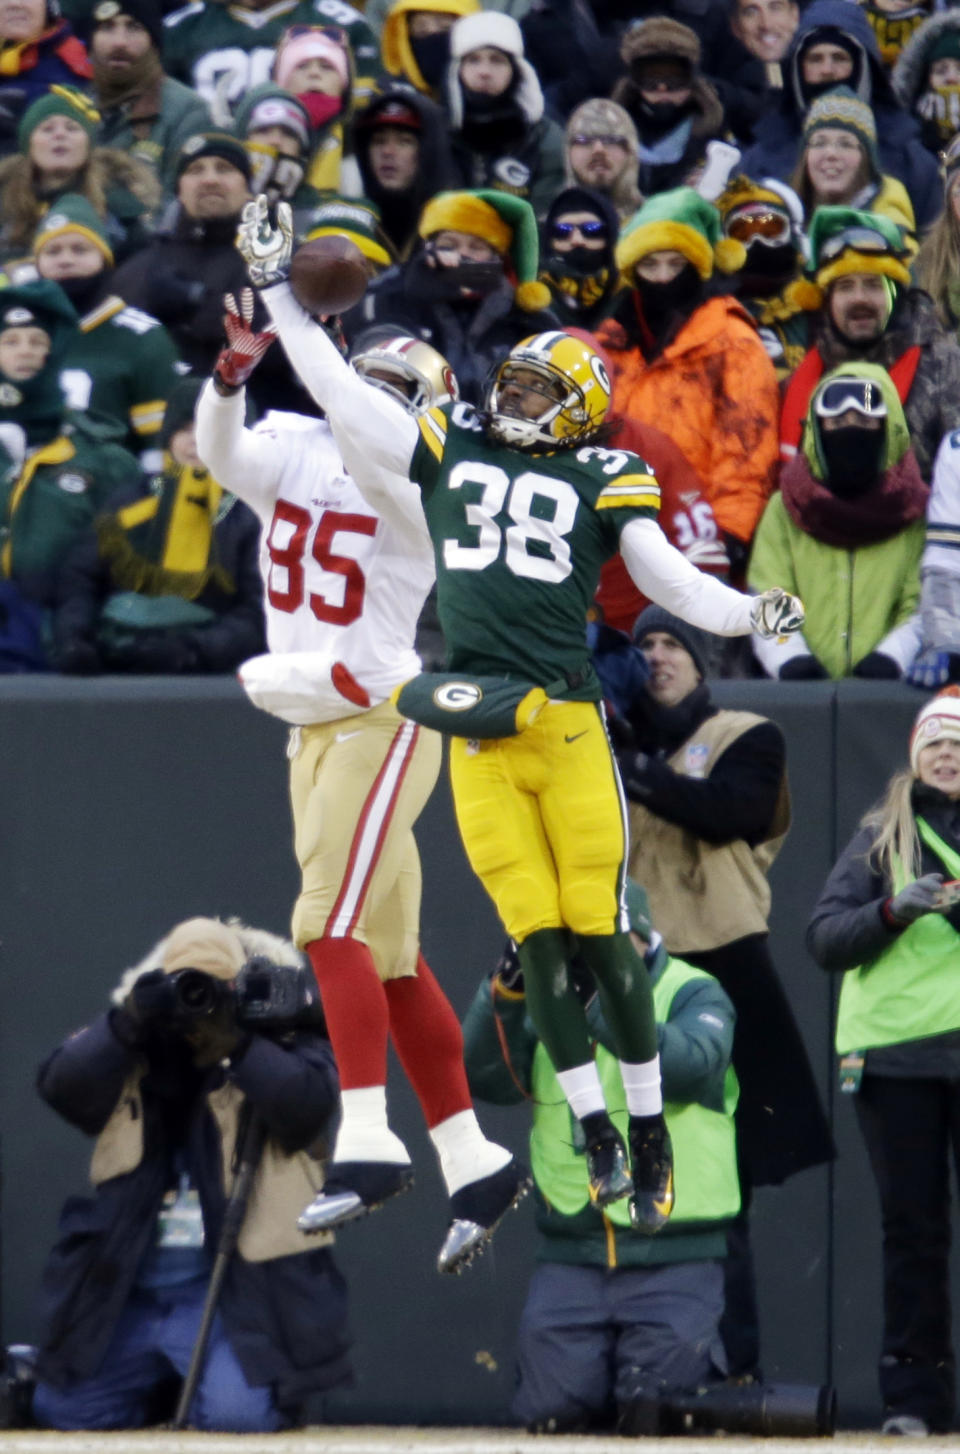 Green Bay Packers cornerback Tramon Williams (38) breaks up a pass intended for San Francisco 49ers tight end Vernon Davis (85) during the first half of an NFL wild-card playoff football game, Sunday, Jan. 5, 2014, in Green Bay, Wis. (AP Photo/Jeffrey Phelps)